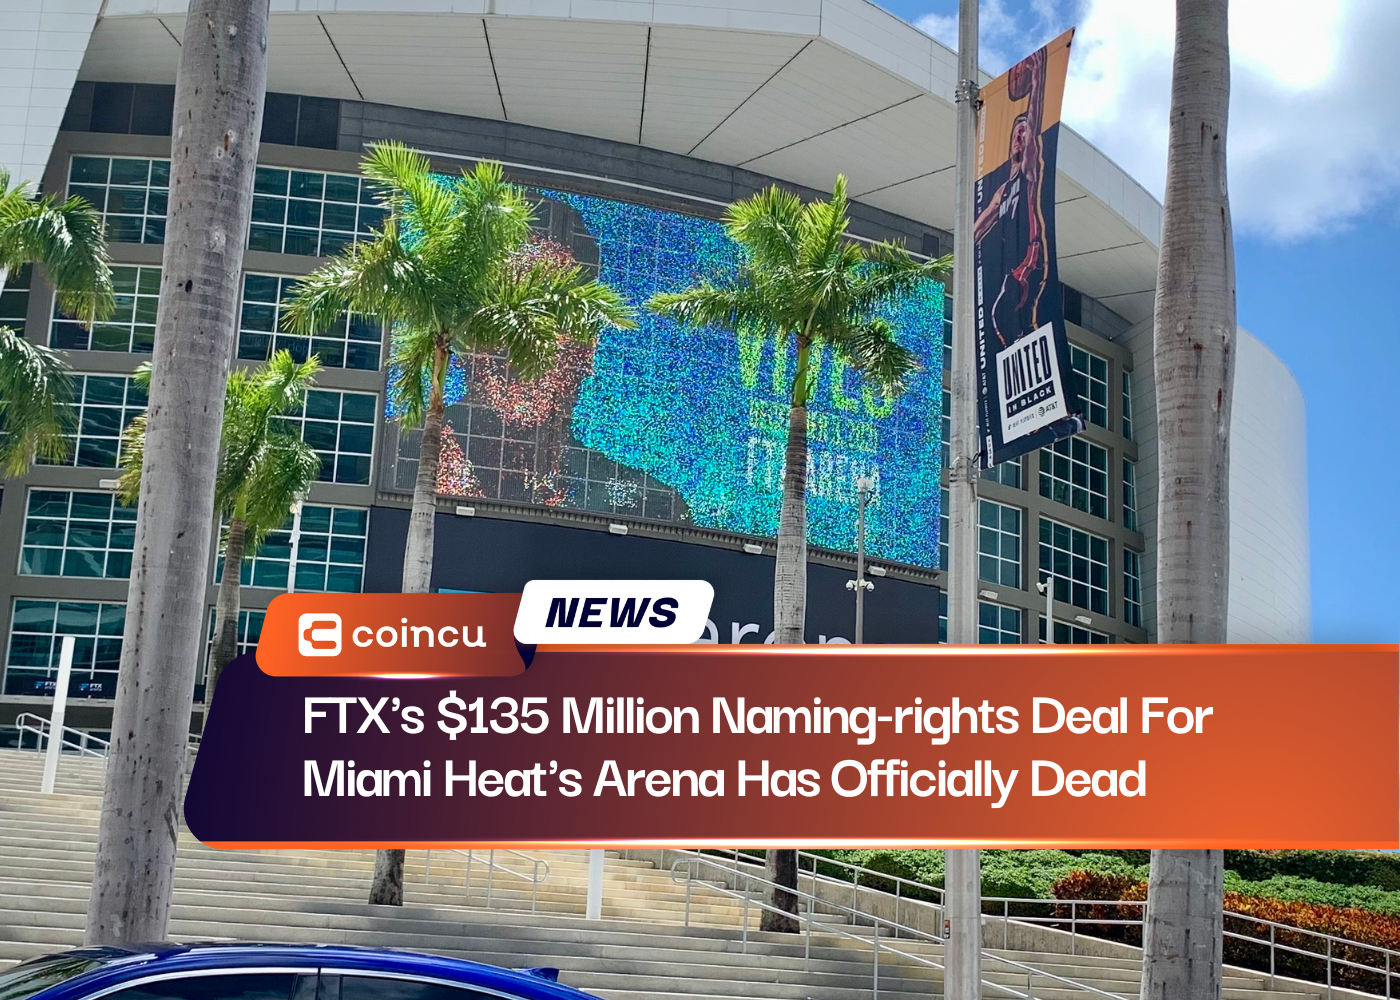 FTX's $135 Million Naming-rights Deal For Miami Heat's Arena Has Officially Dead